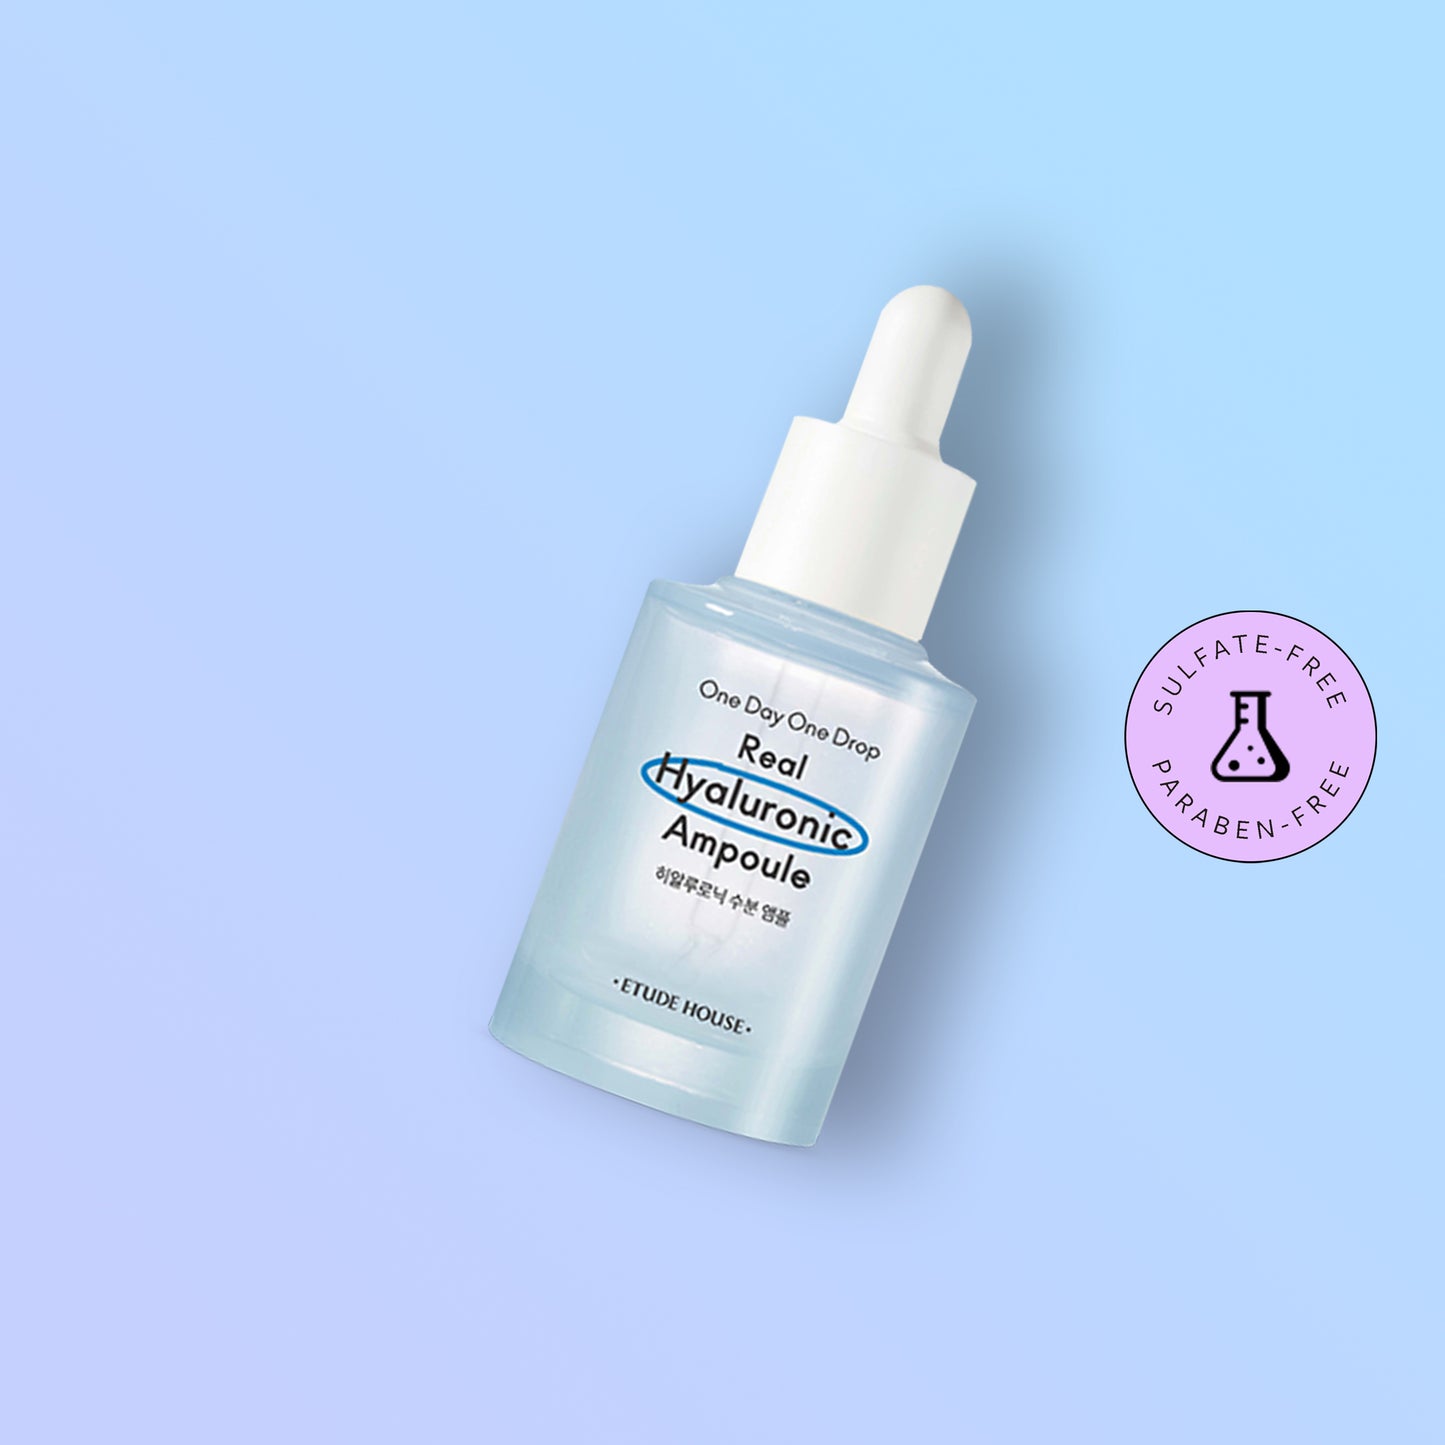 ONE DAY ONE DROP REAL HYALURONIC AMPOULE